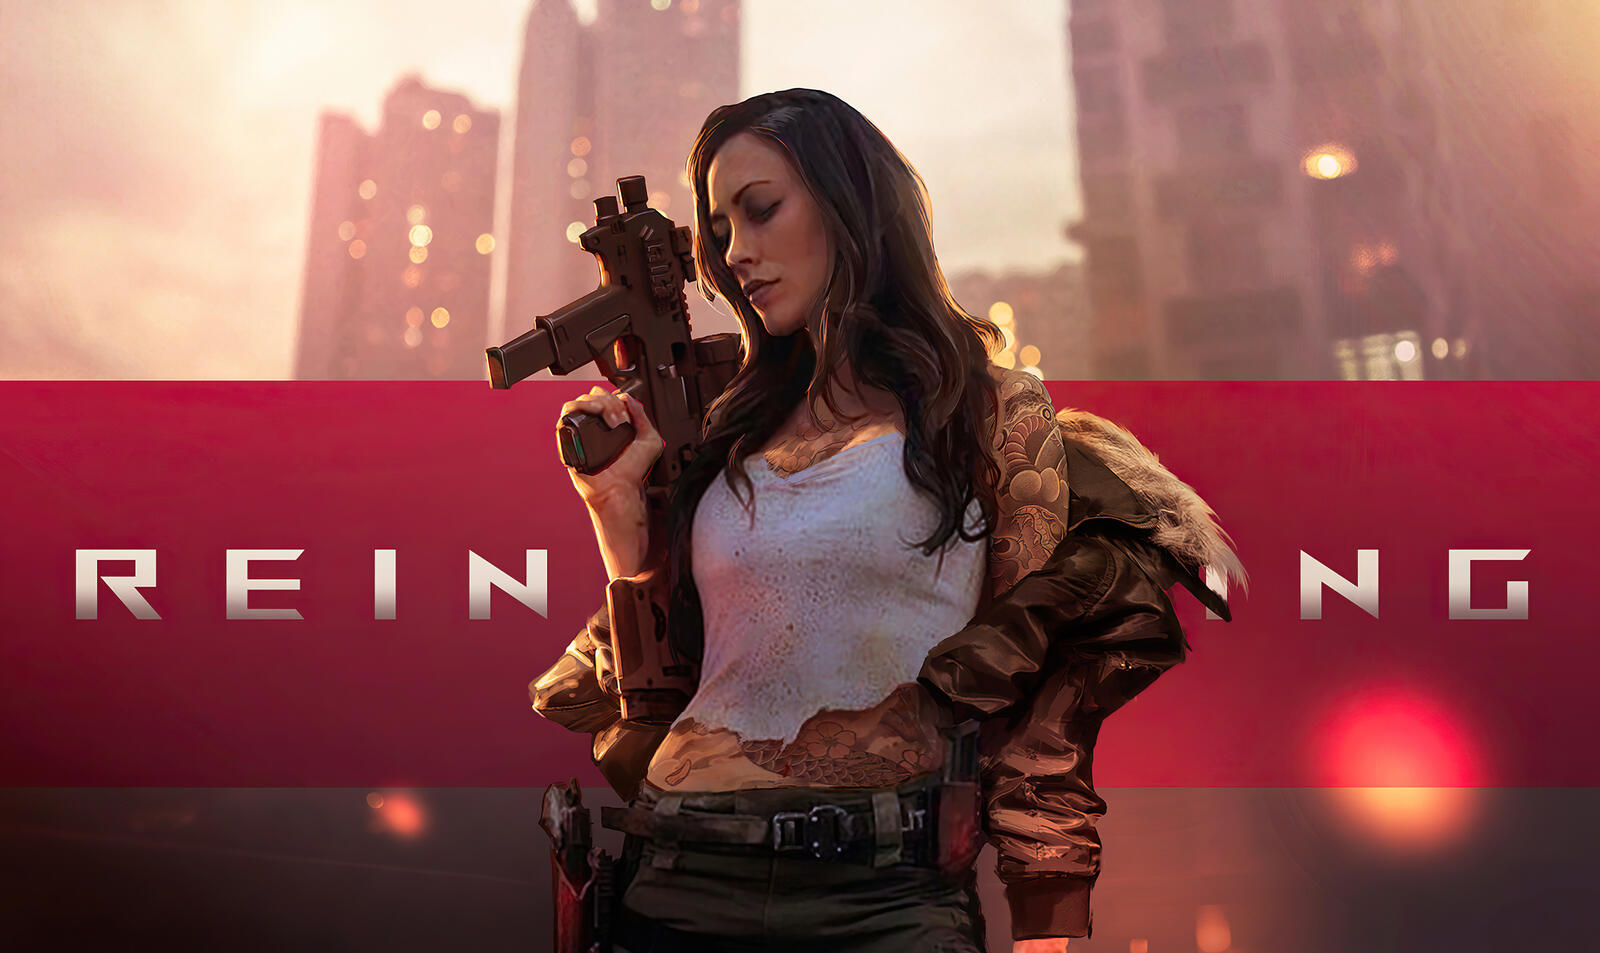 Free photo The girl with the machine gun from the game